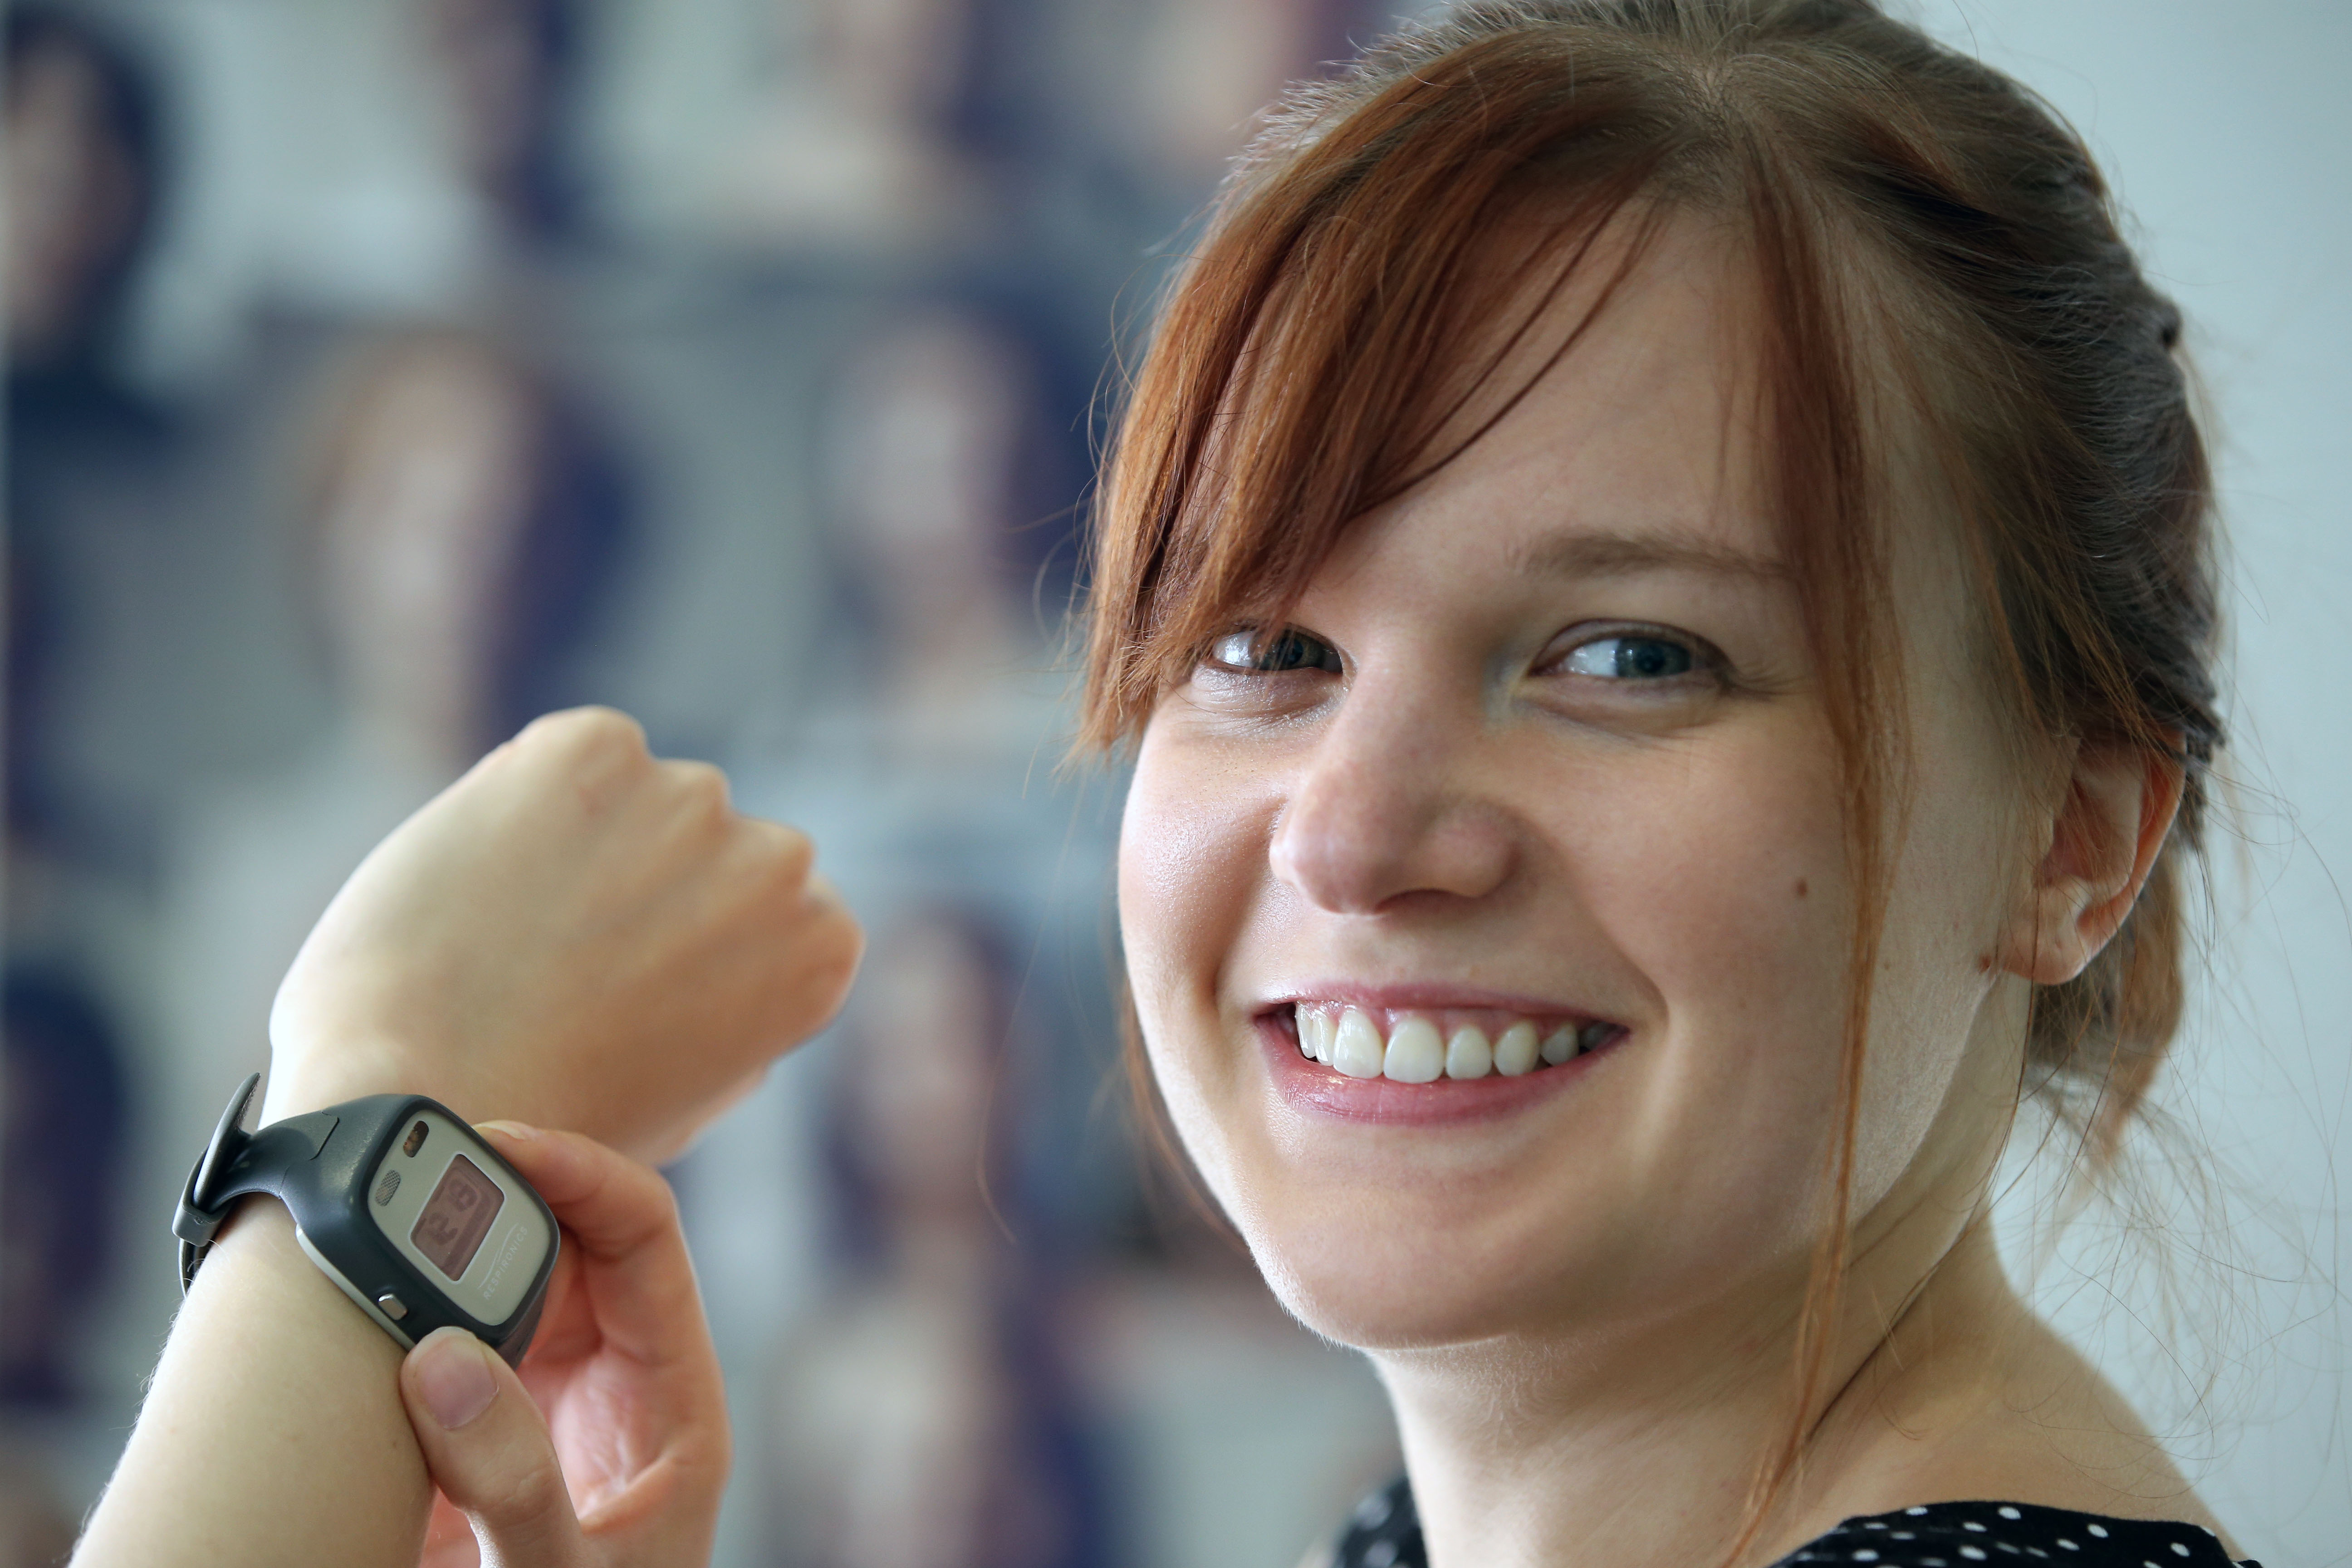 Photograph of Katie Lewis demonstrating a watch used as part of her research